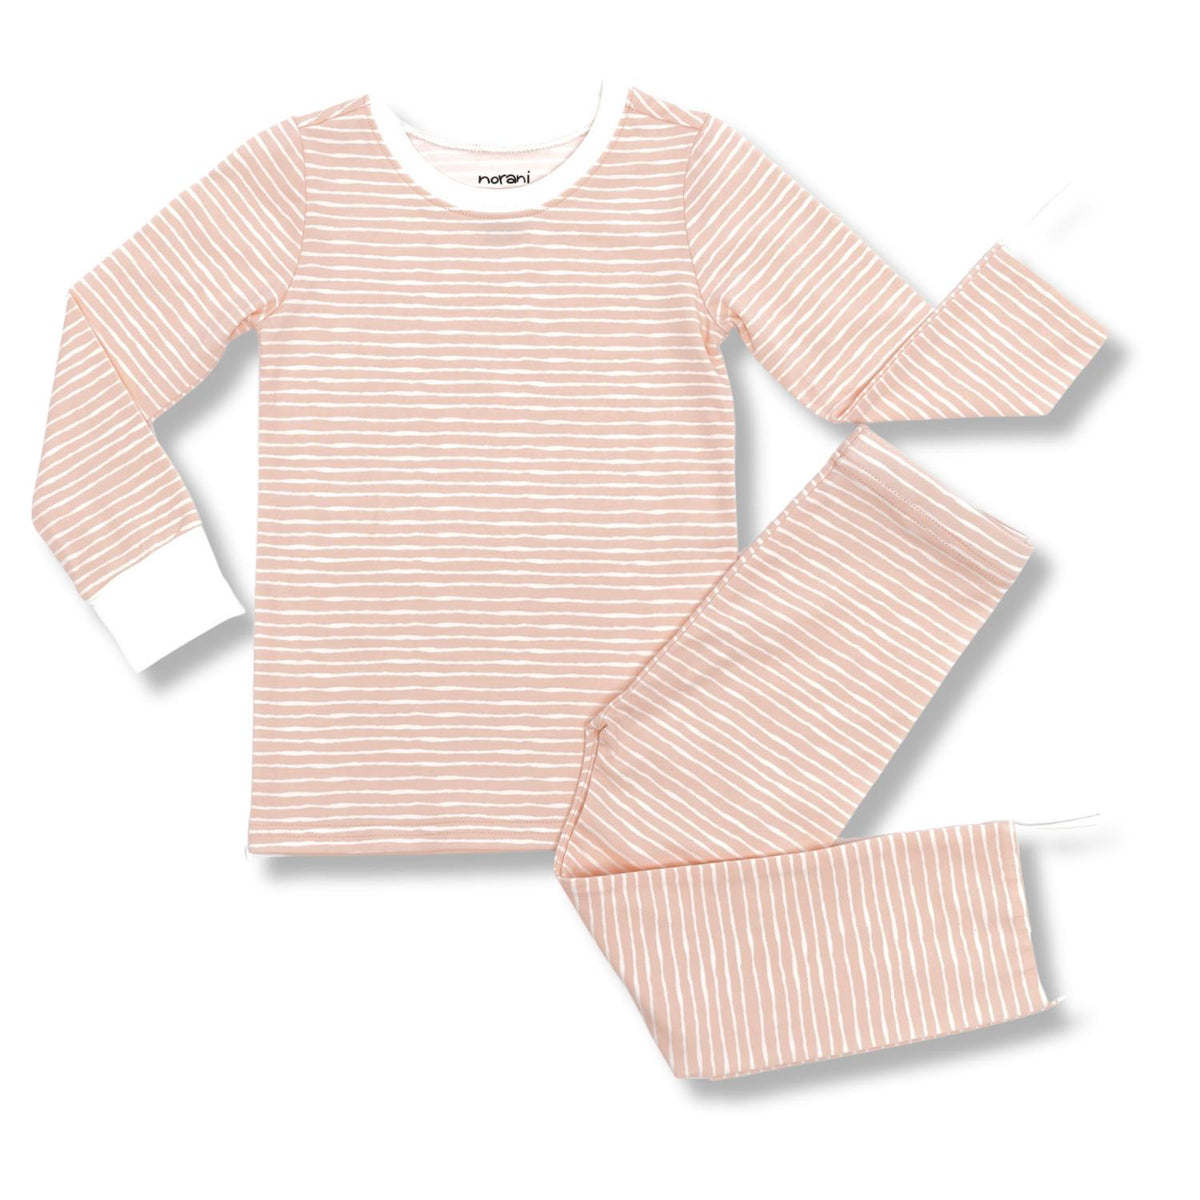  Norani Baby Long Sleeve Kids Pajamas in Pink and White Stripes